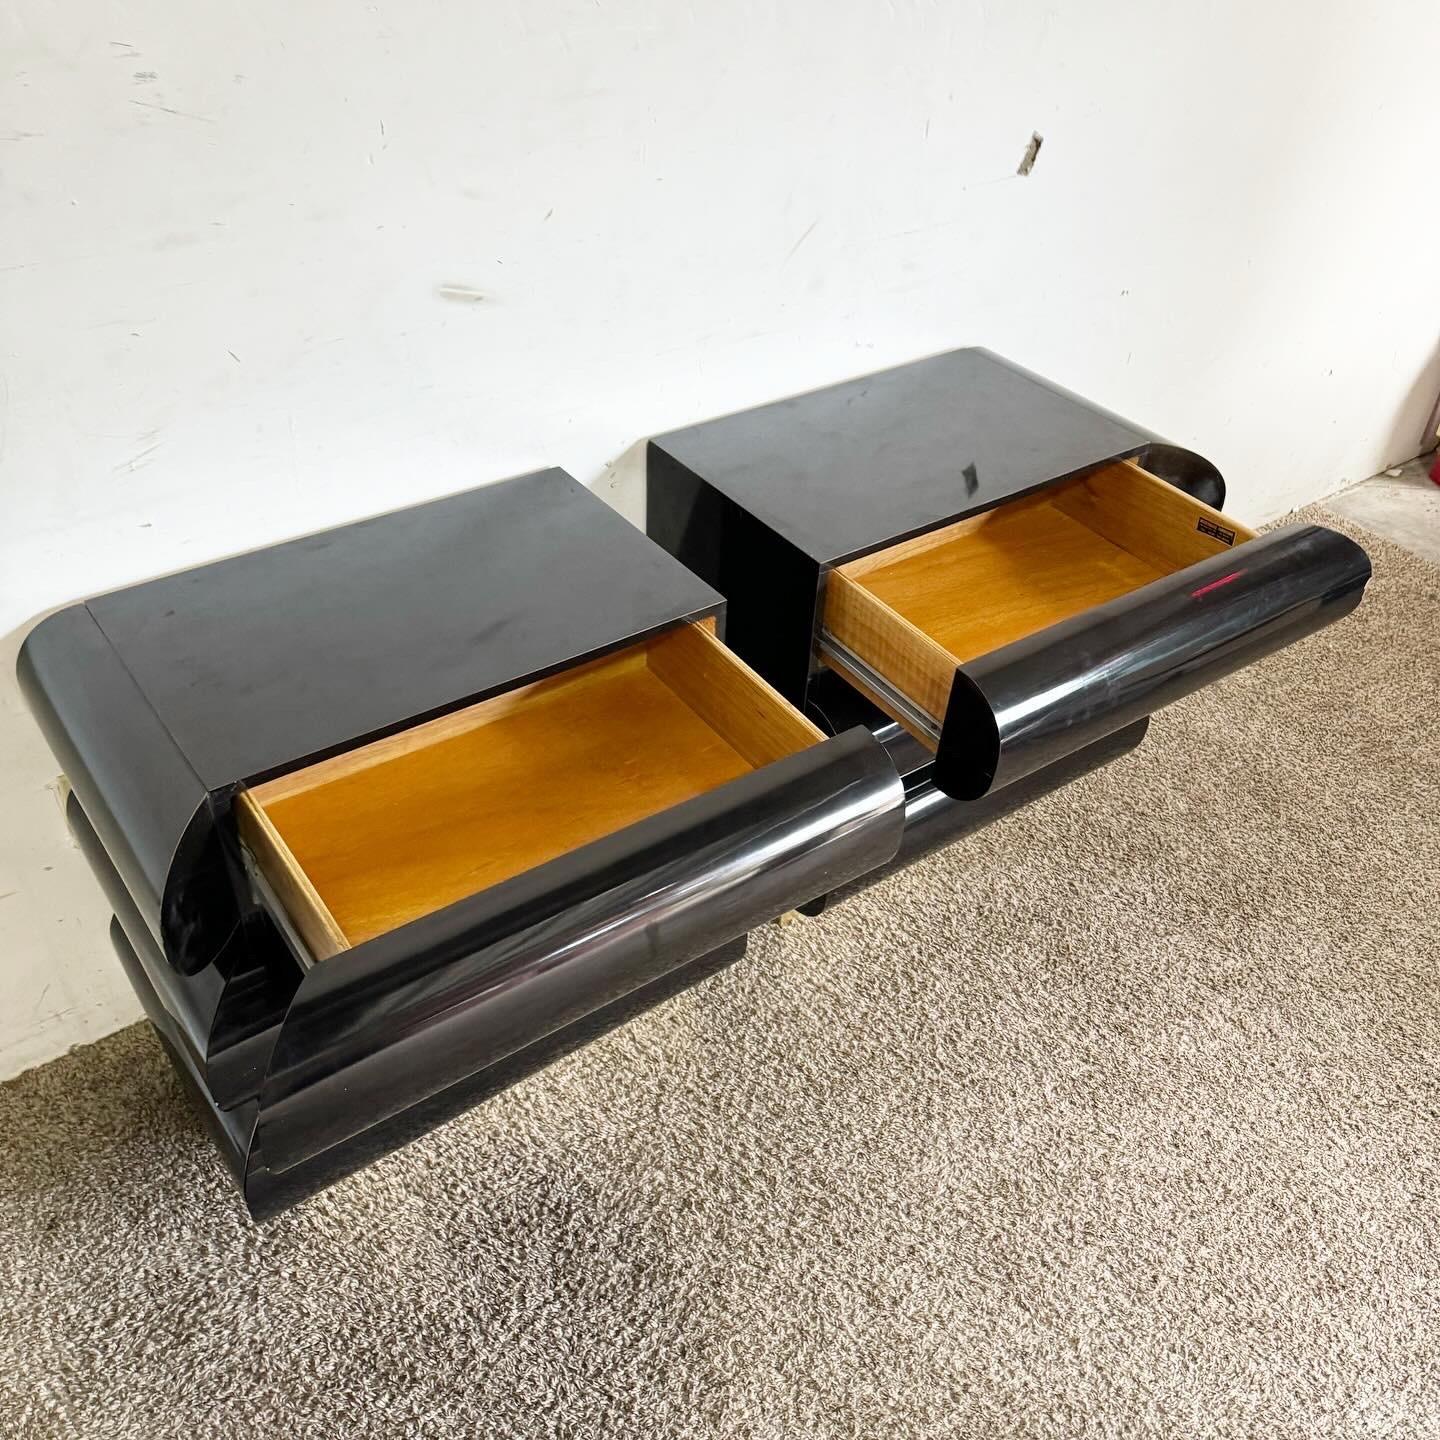 Introduce a modern luxury to your bedroom with these Postmodern Black Lacquer Laminate Bullnose Nightstands on Gold Bases. This pair features a sleek design with smooth bullnose edges and a rich black finish, contrasted by elegant gold bases.